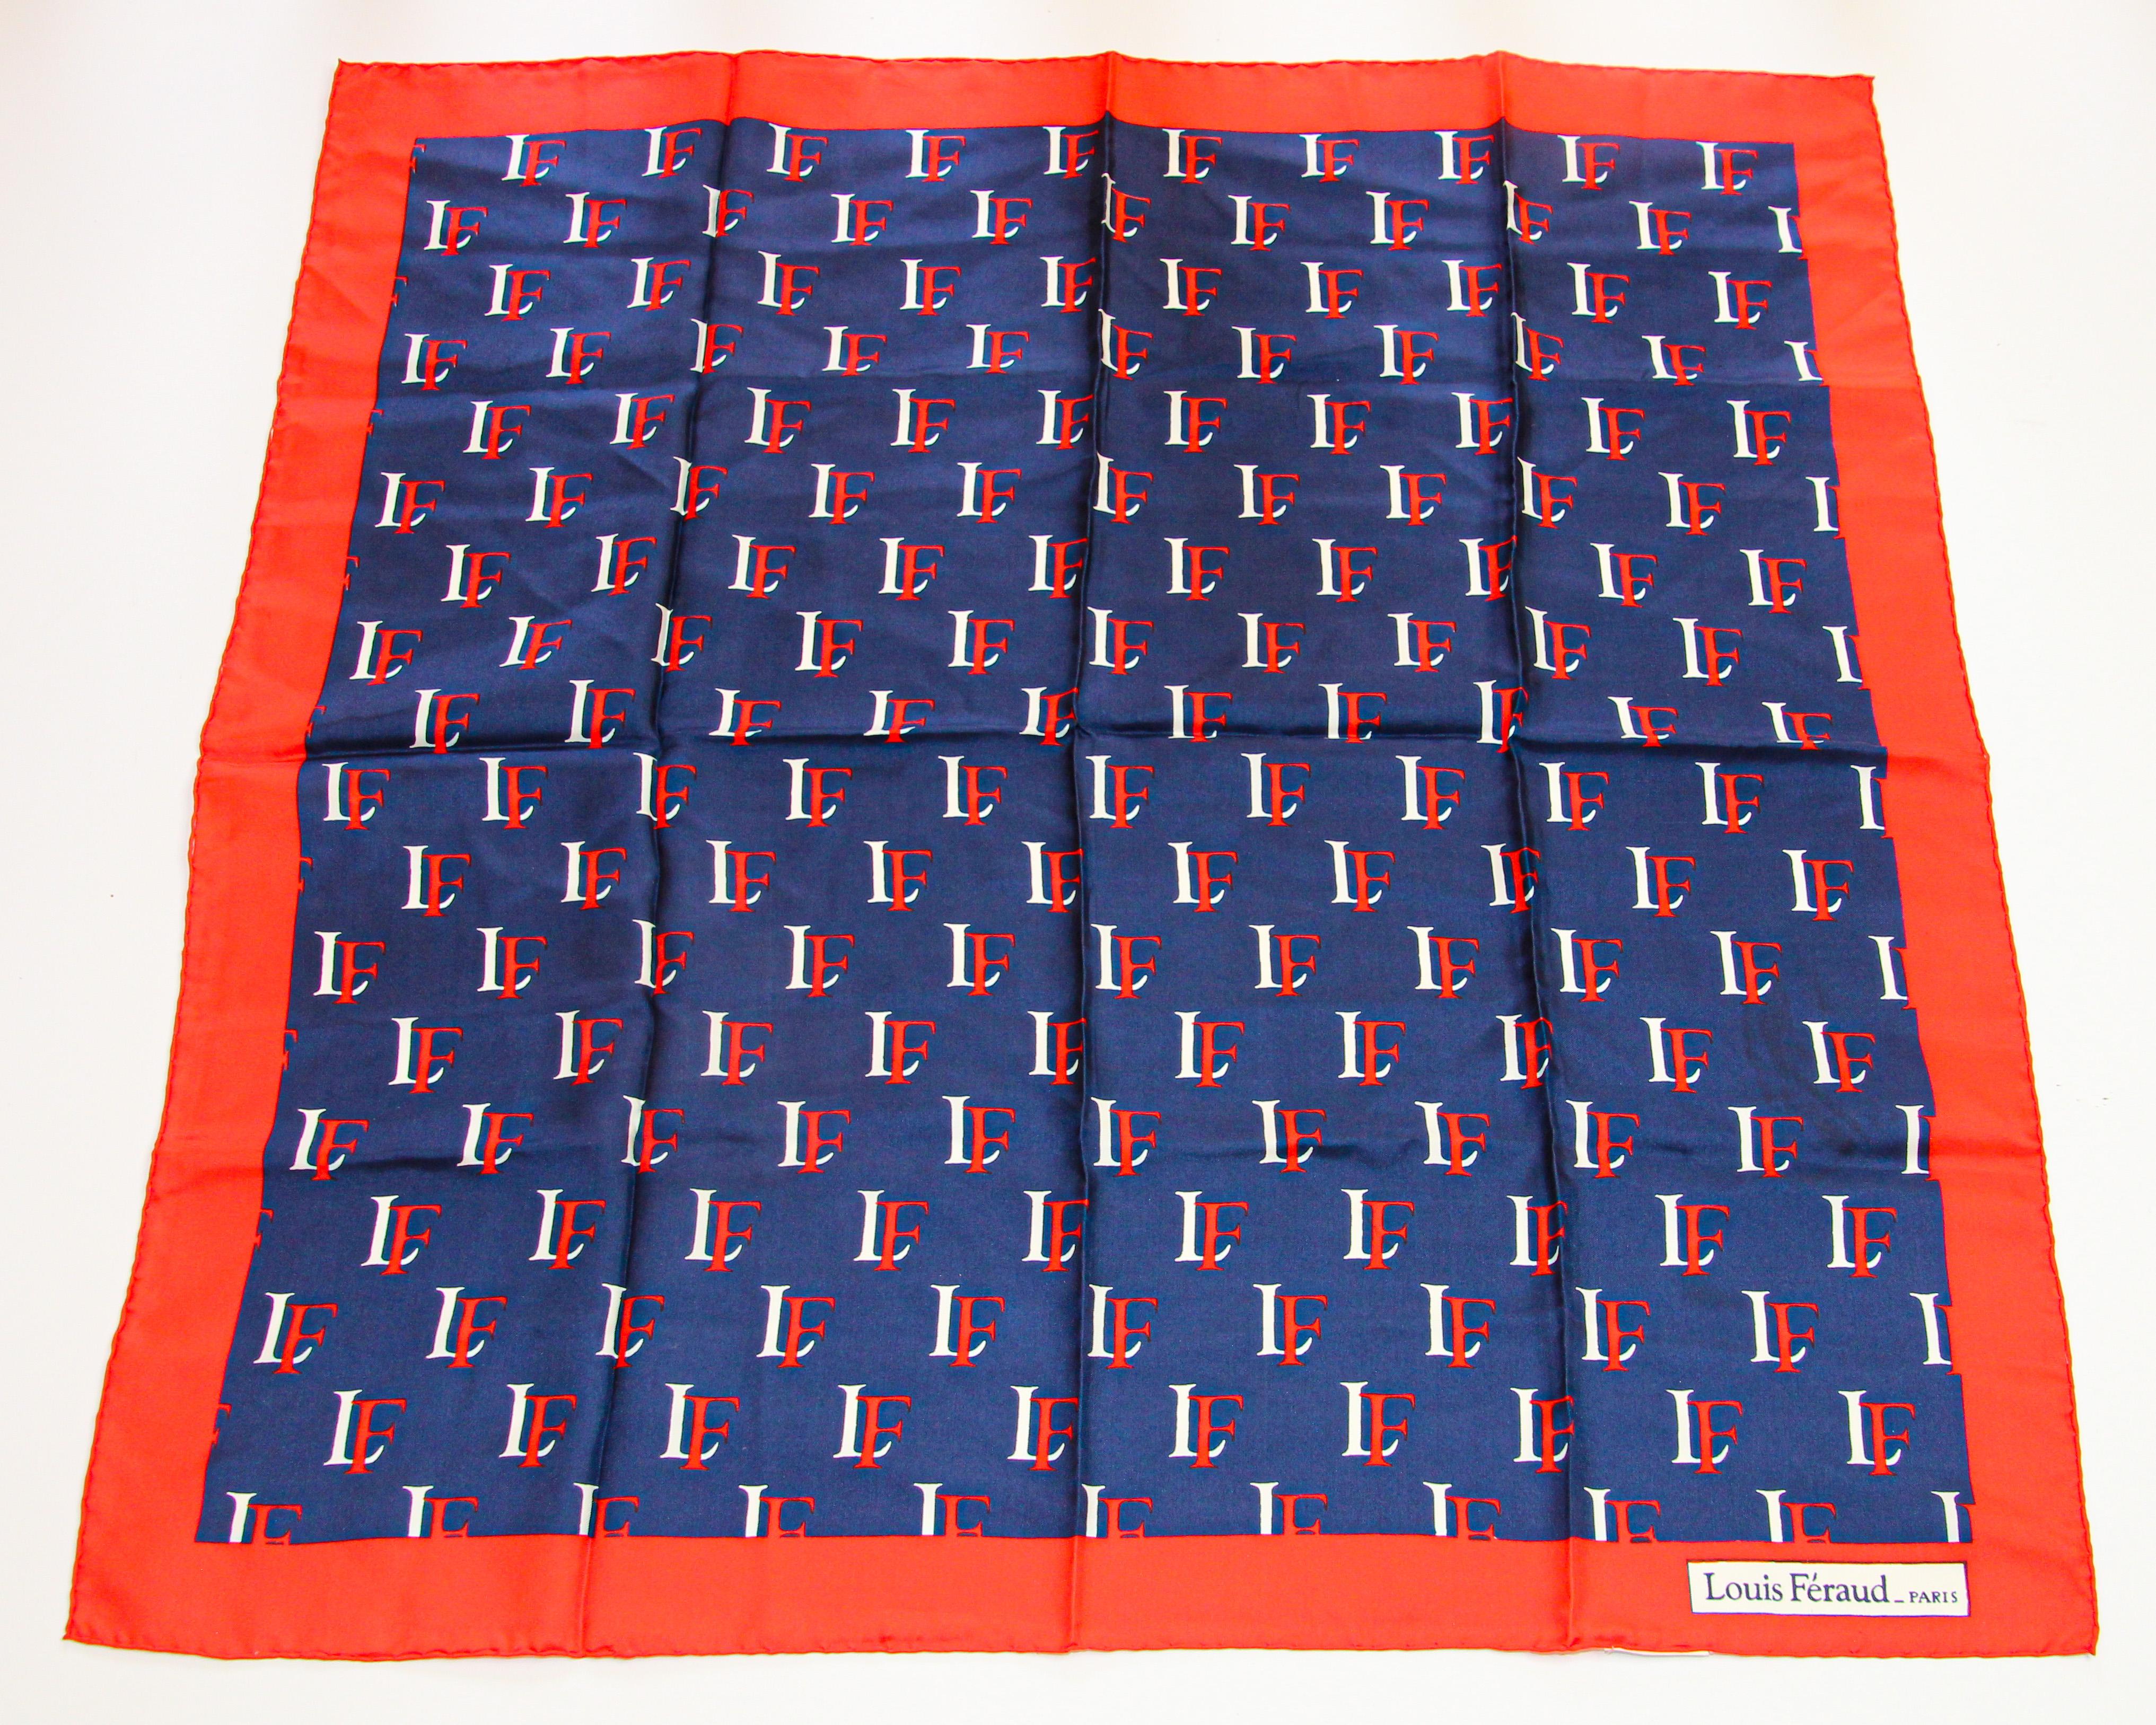 Vintage Louis Feraud Paris Silk Scarf Red Blue and White In Good Condition For Sale In North Hollywood, CA